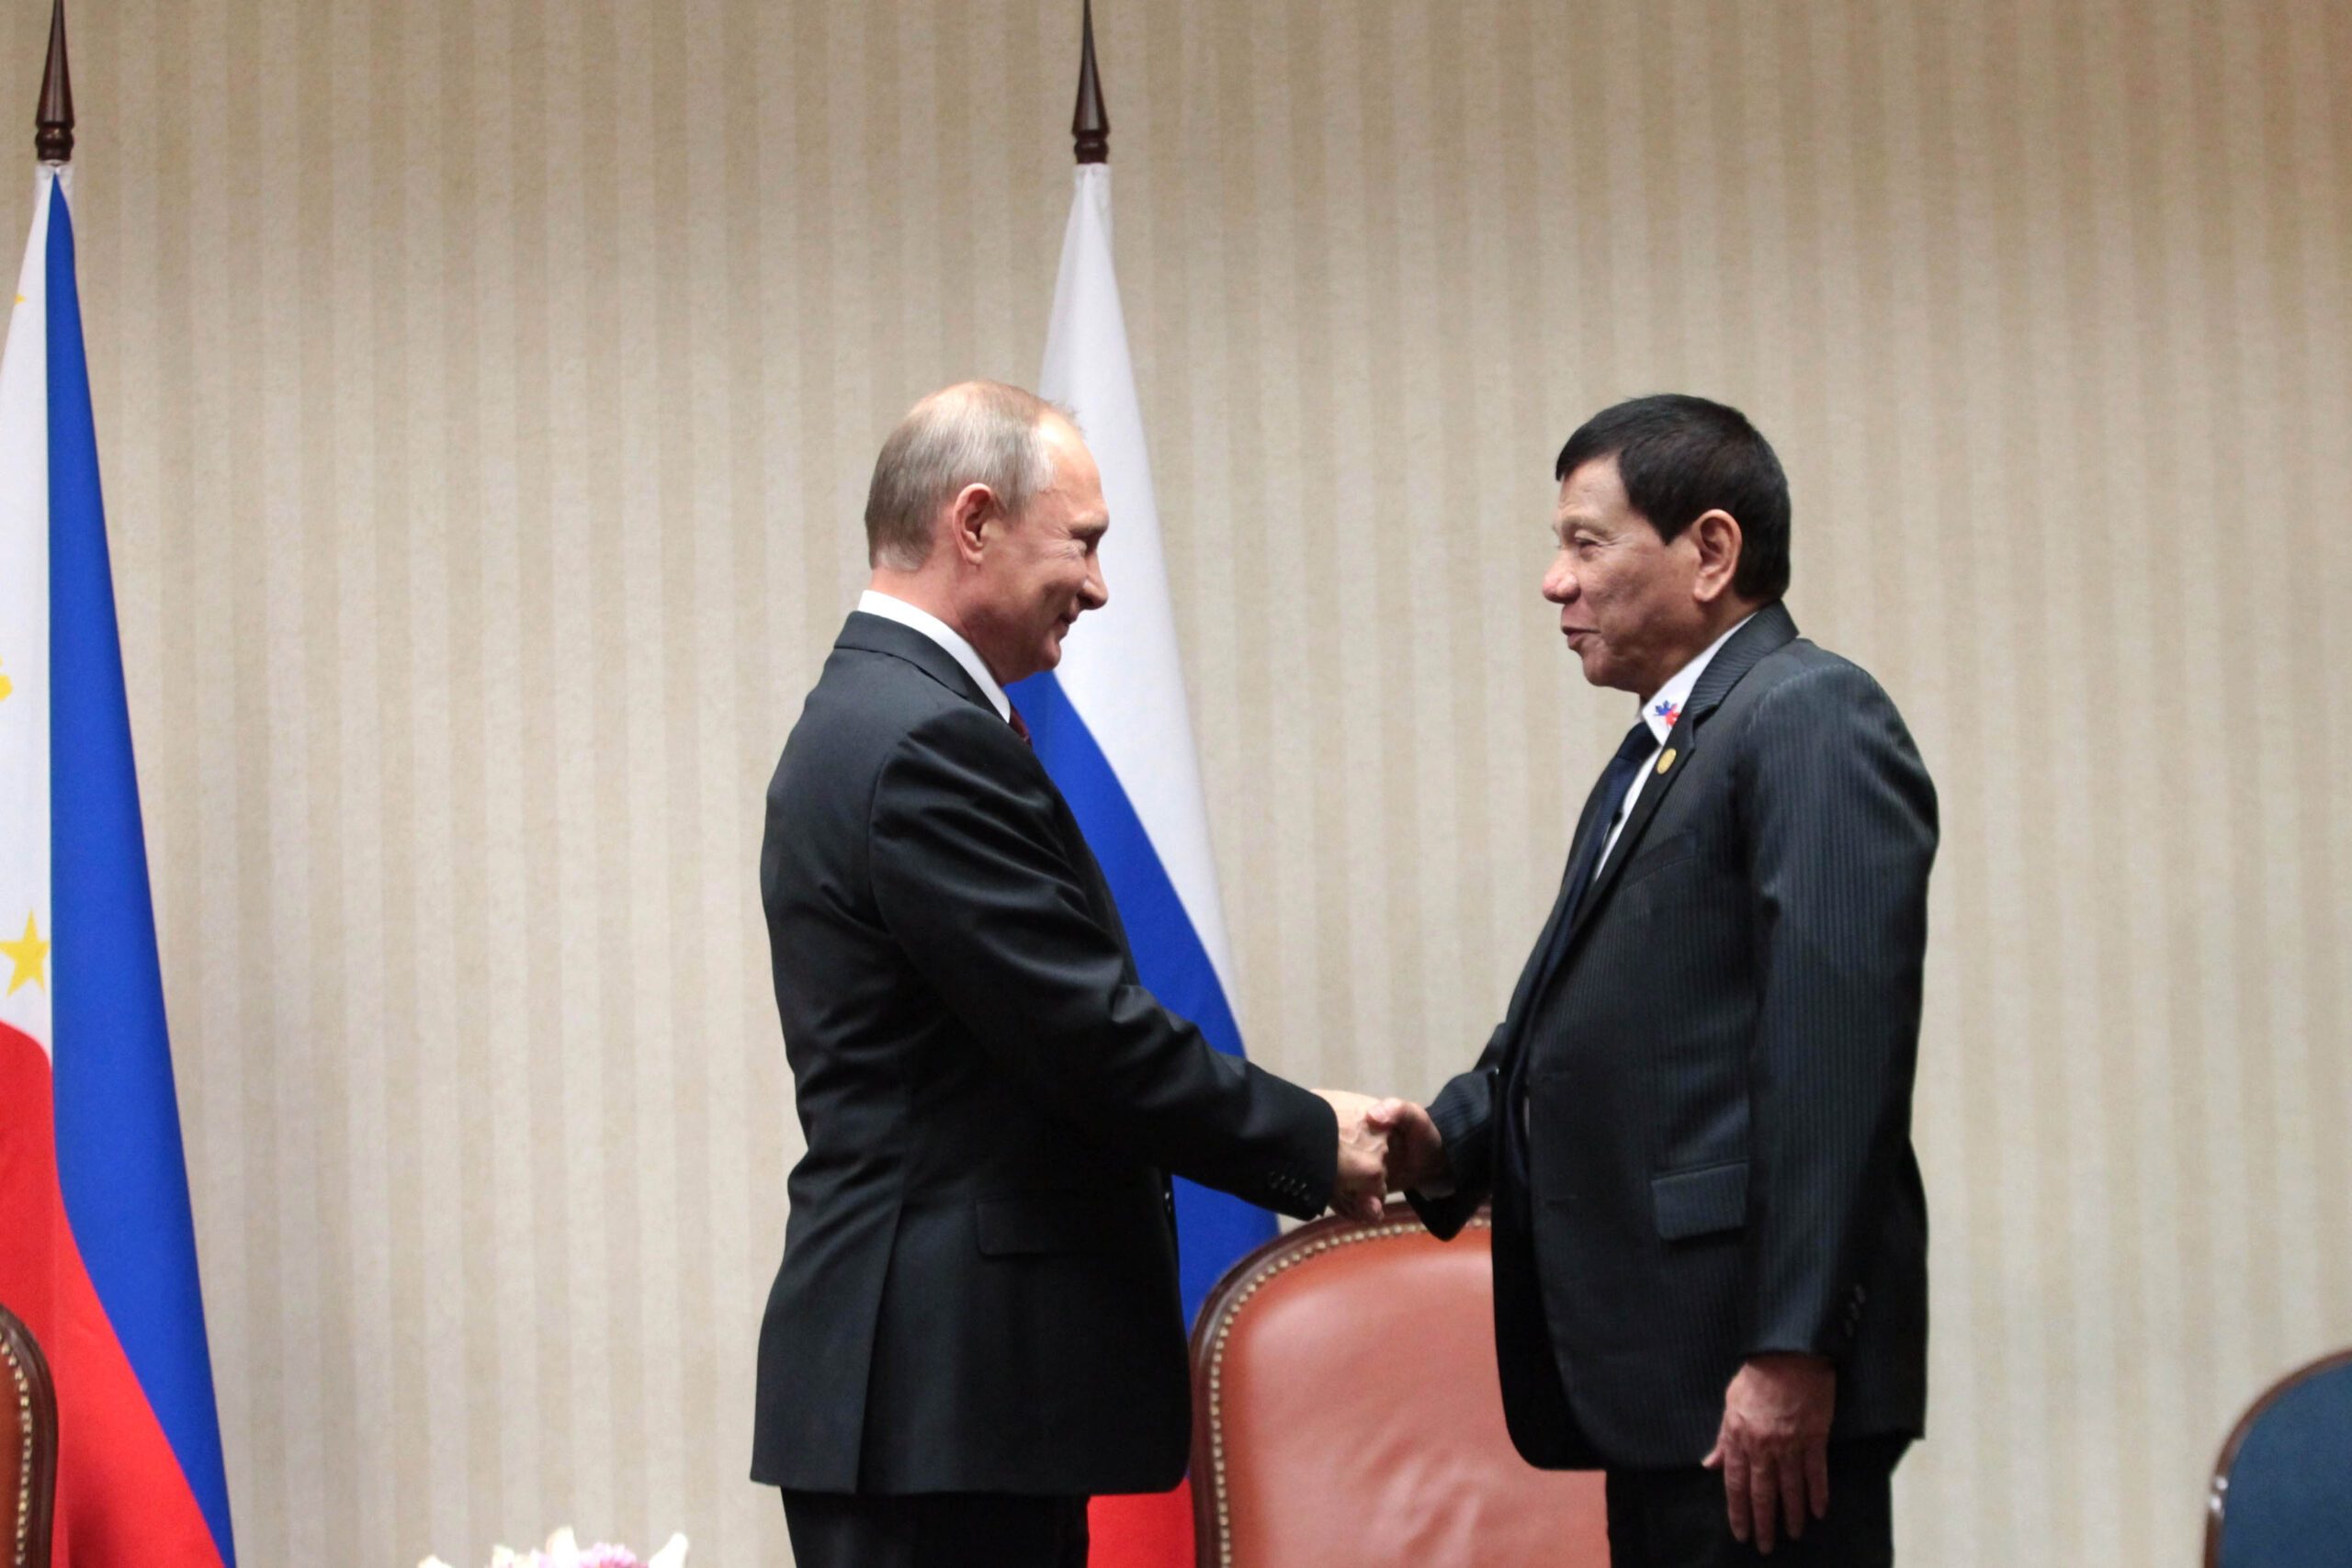 Duterte to fly to Russia on May 25